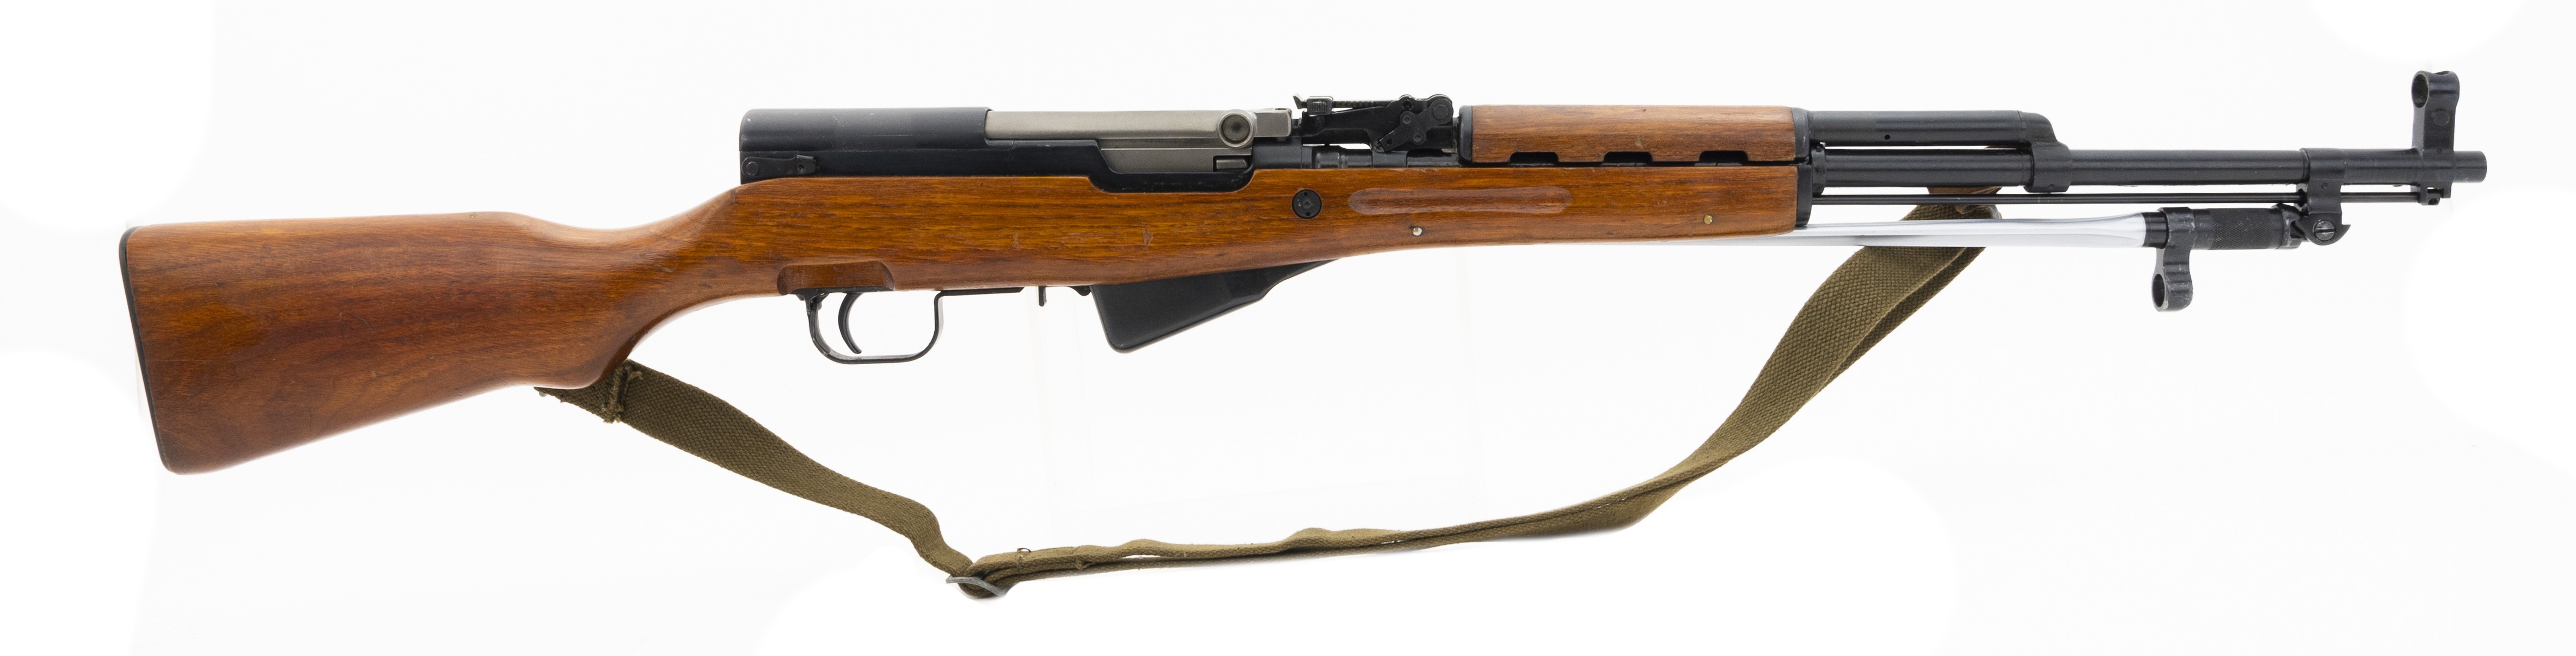 Chinese SKS 7.62X39 caliber rifle for sale.